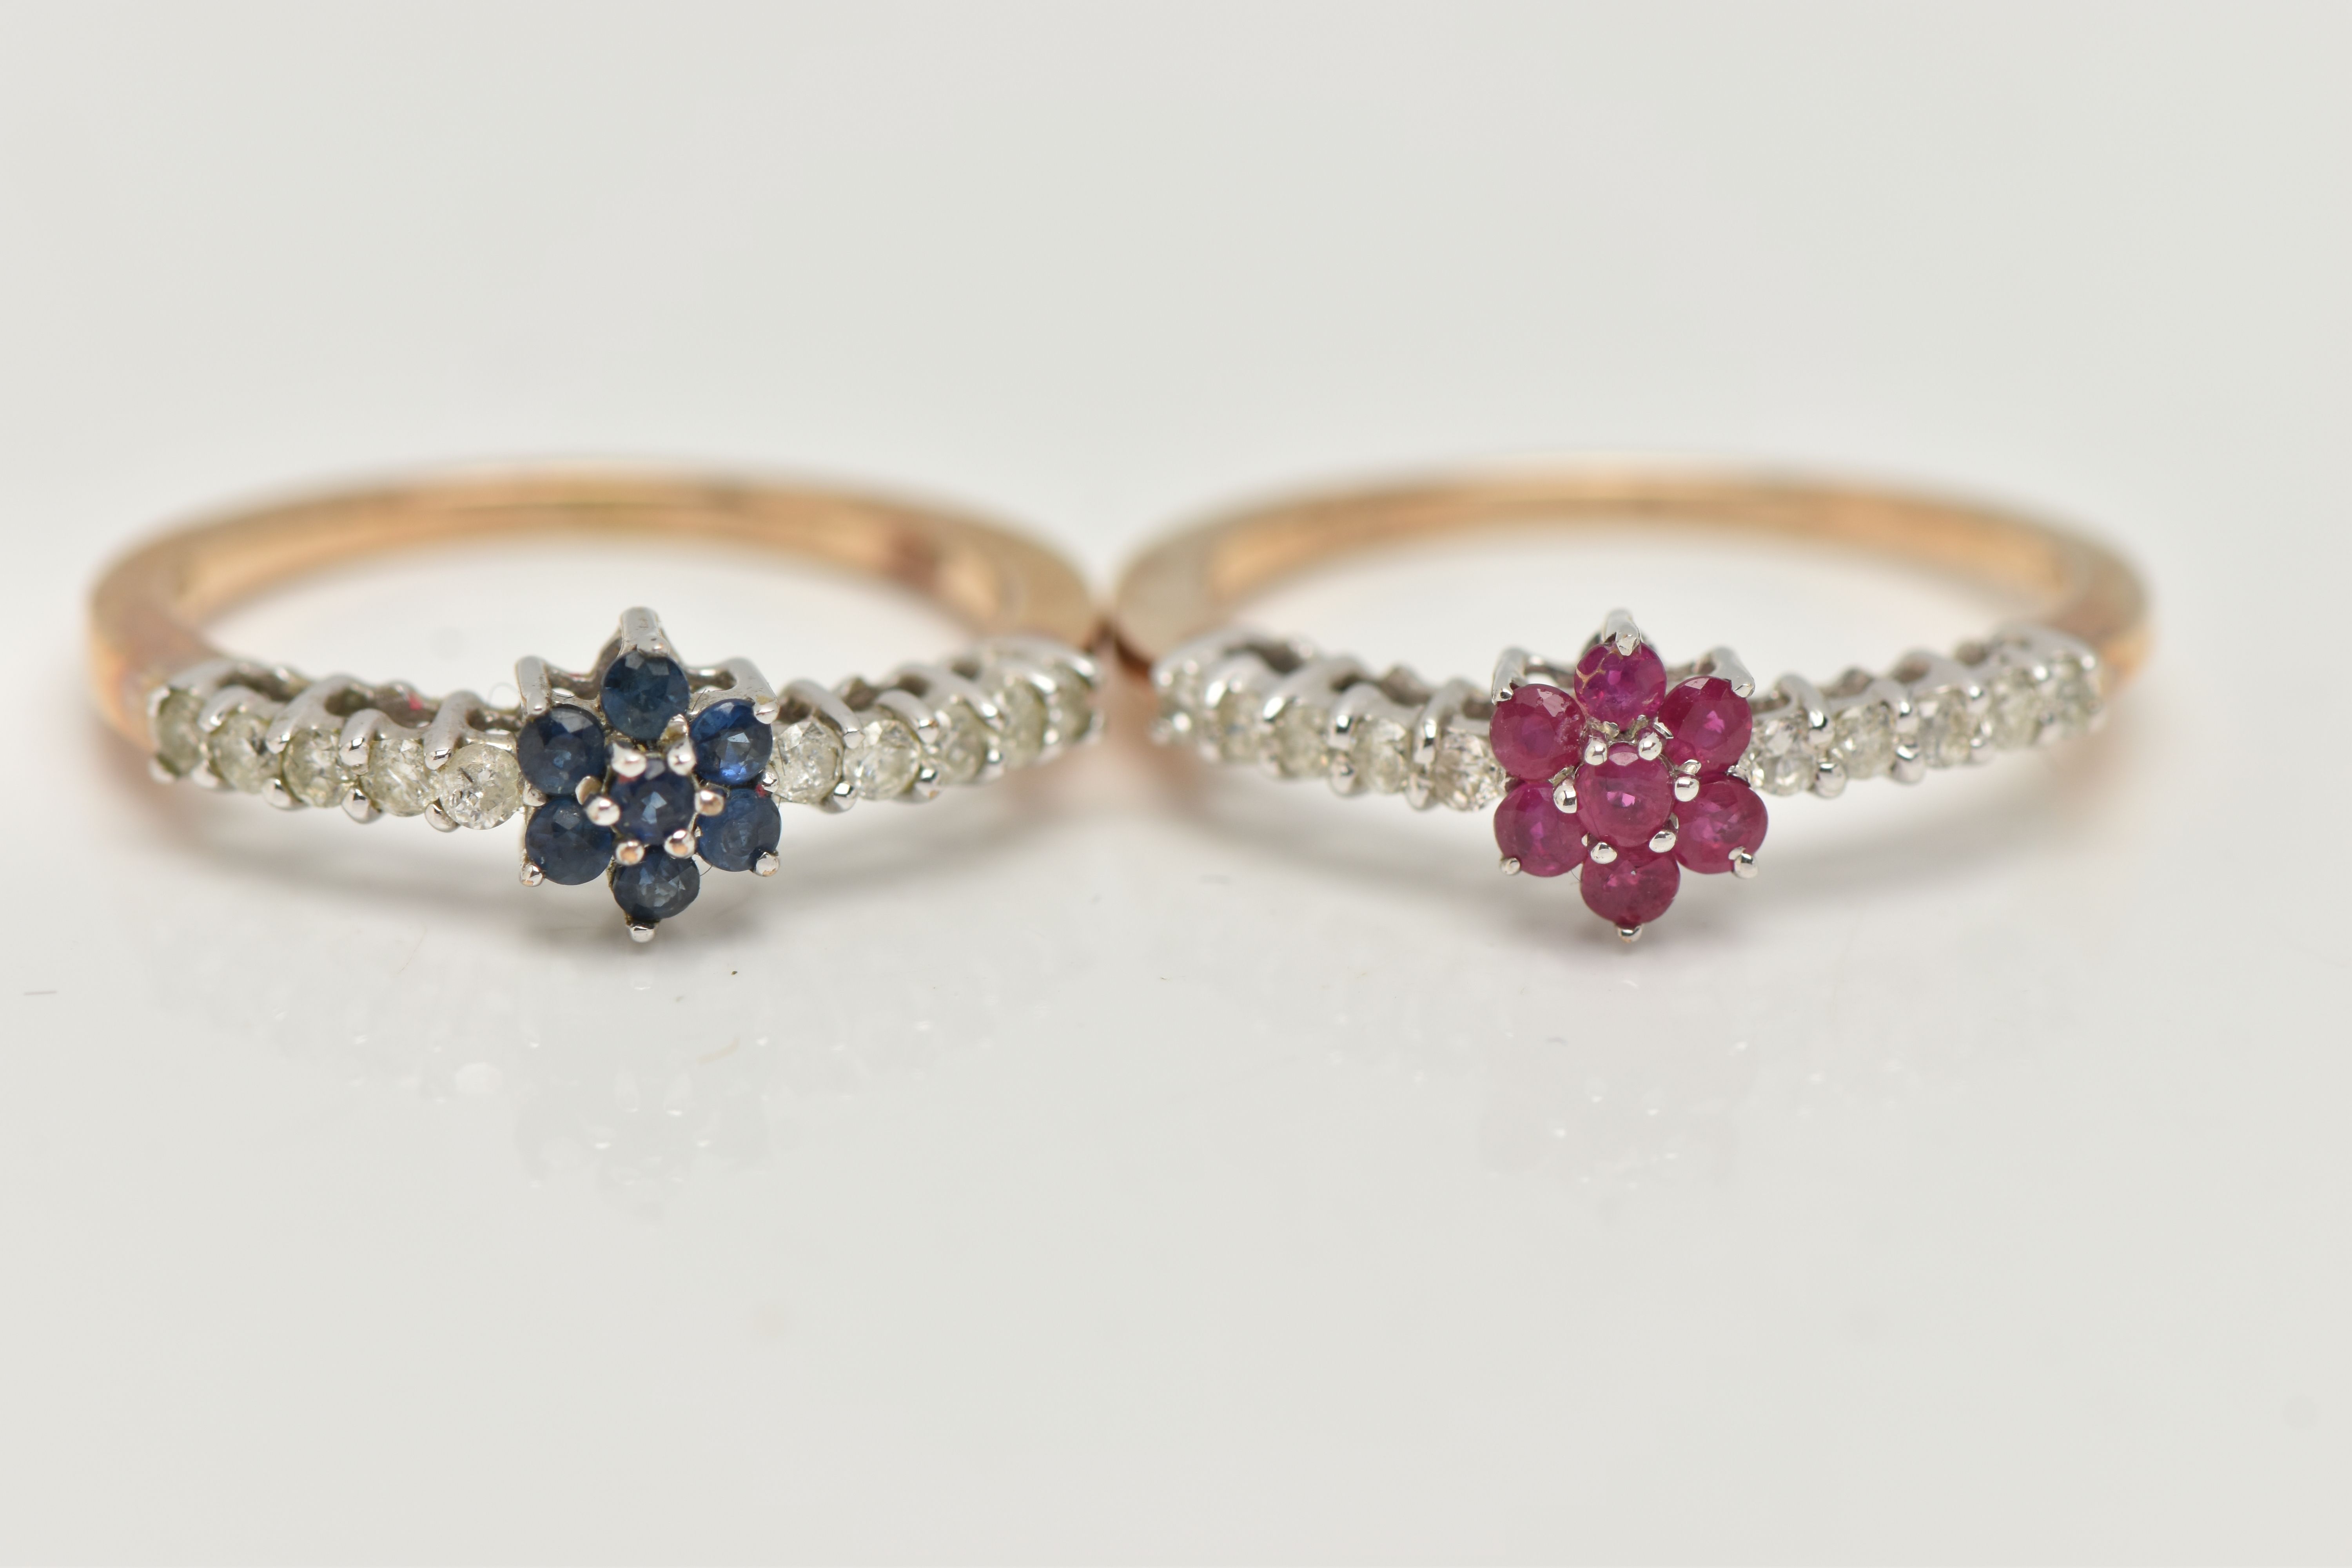 TWO 9CT GOLD GEM SET RINGS, both designed with a line of brilliant cut diamonds, the first with a